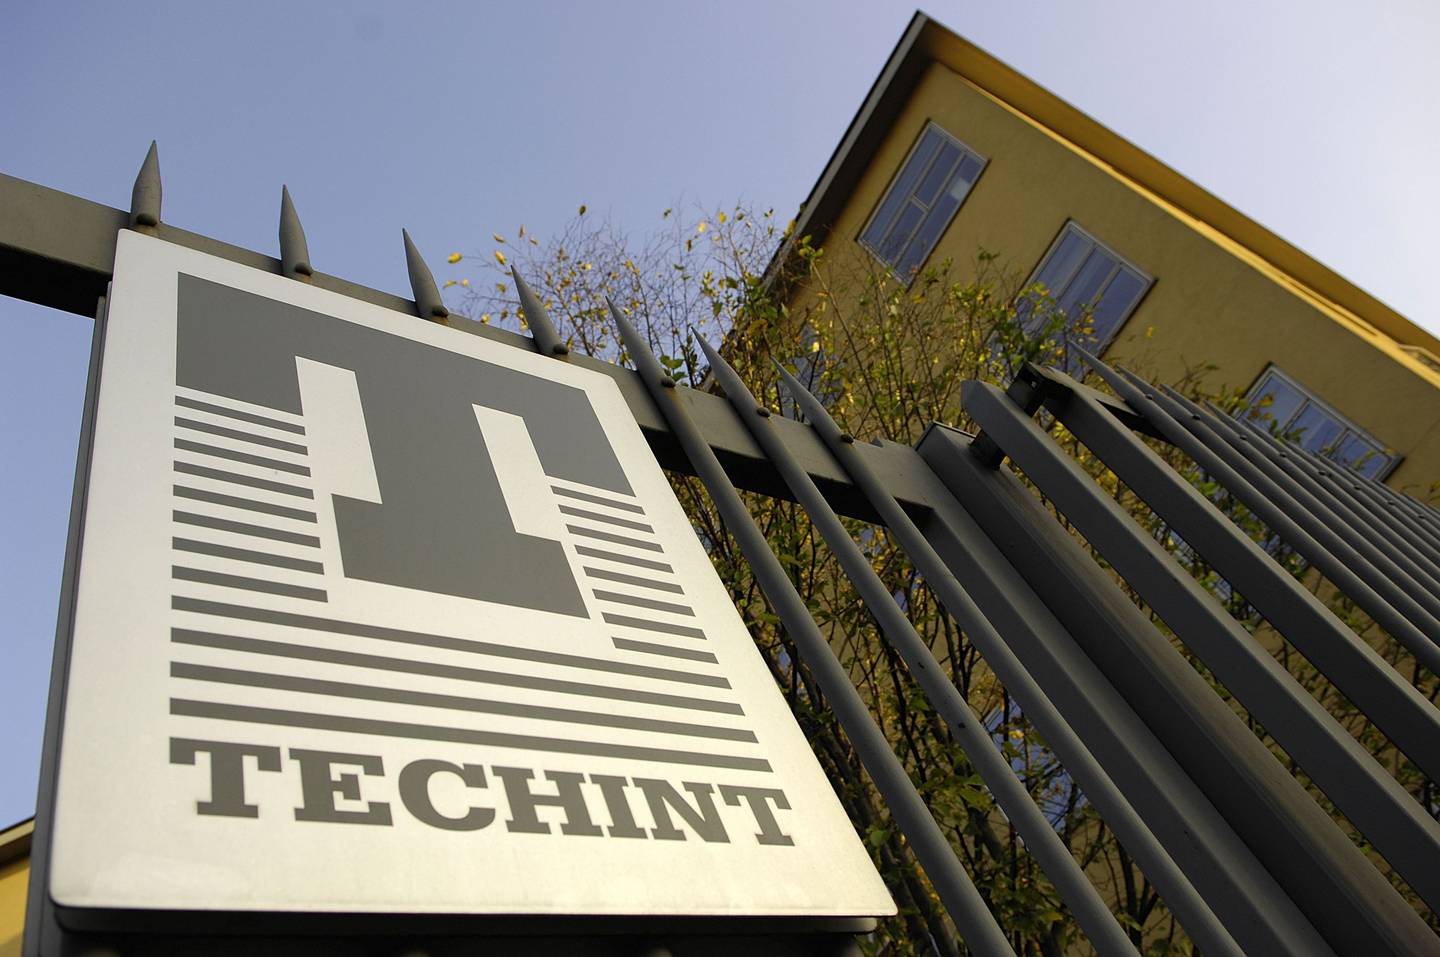 The Techint headquarters stand in Milan, Italy, on Sunday, Oct. 28, 2007. Paolo Riccardo Rocca's Ternium SA owns 60 percent of Luxembourg-based Tenaris, which makes oil and gas pipes. The Buenos Aires-based Rocca family controls Tenaris and Ternium through the Italian-Argentine Techint Group. Photographer: Giuseppe Aresu/Bloomberg News